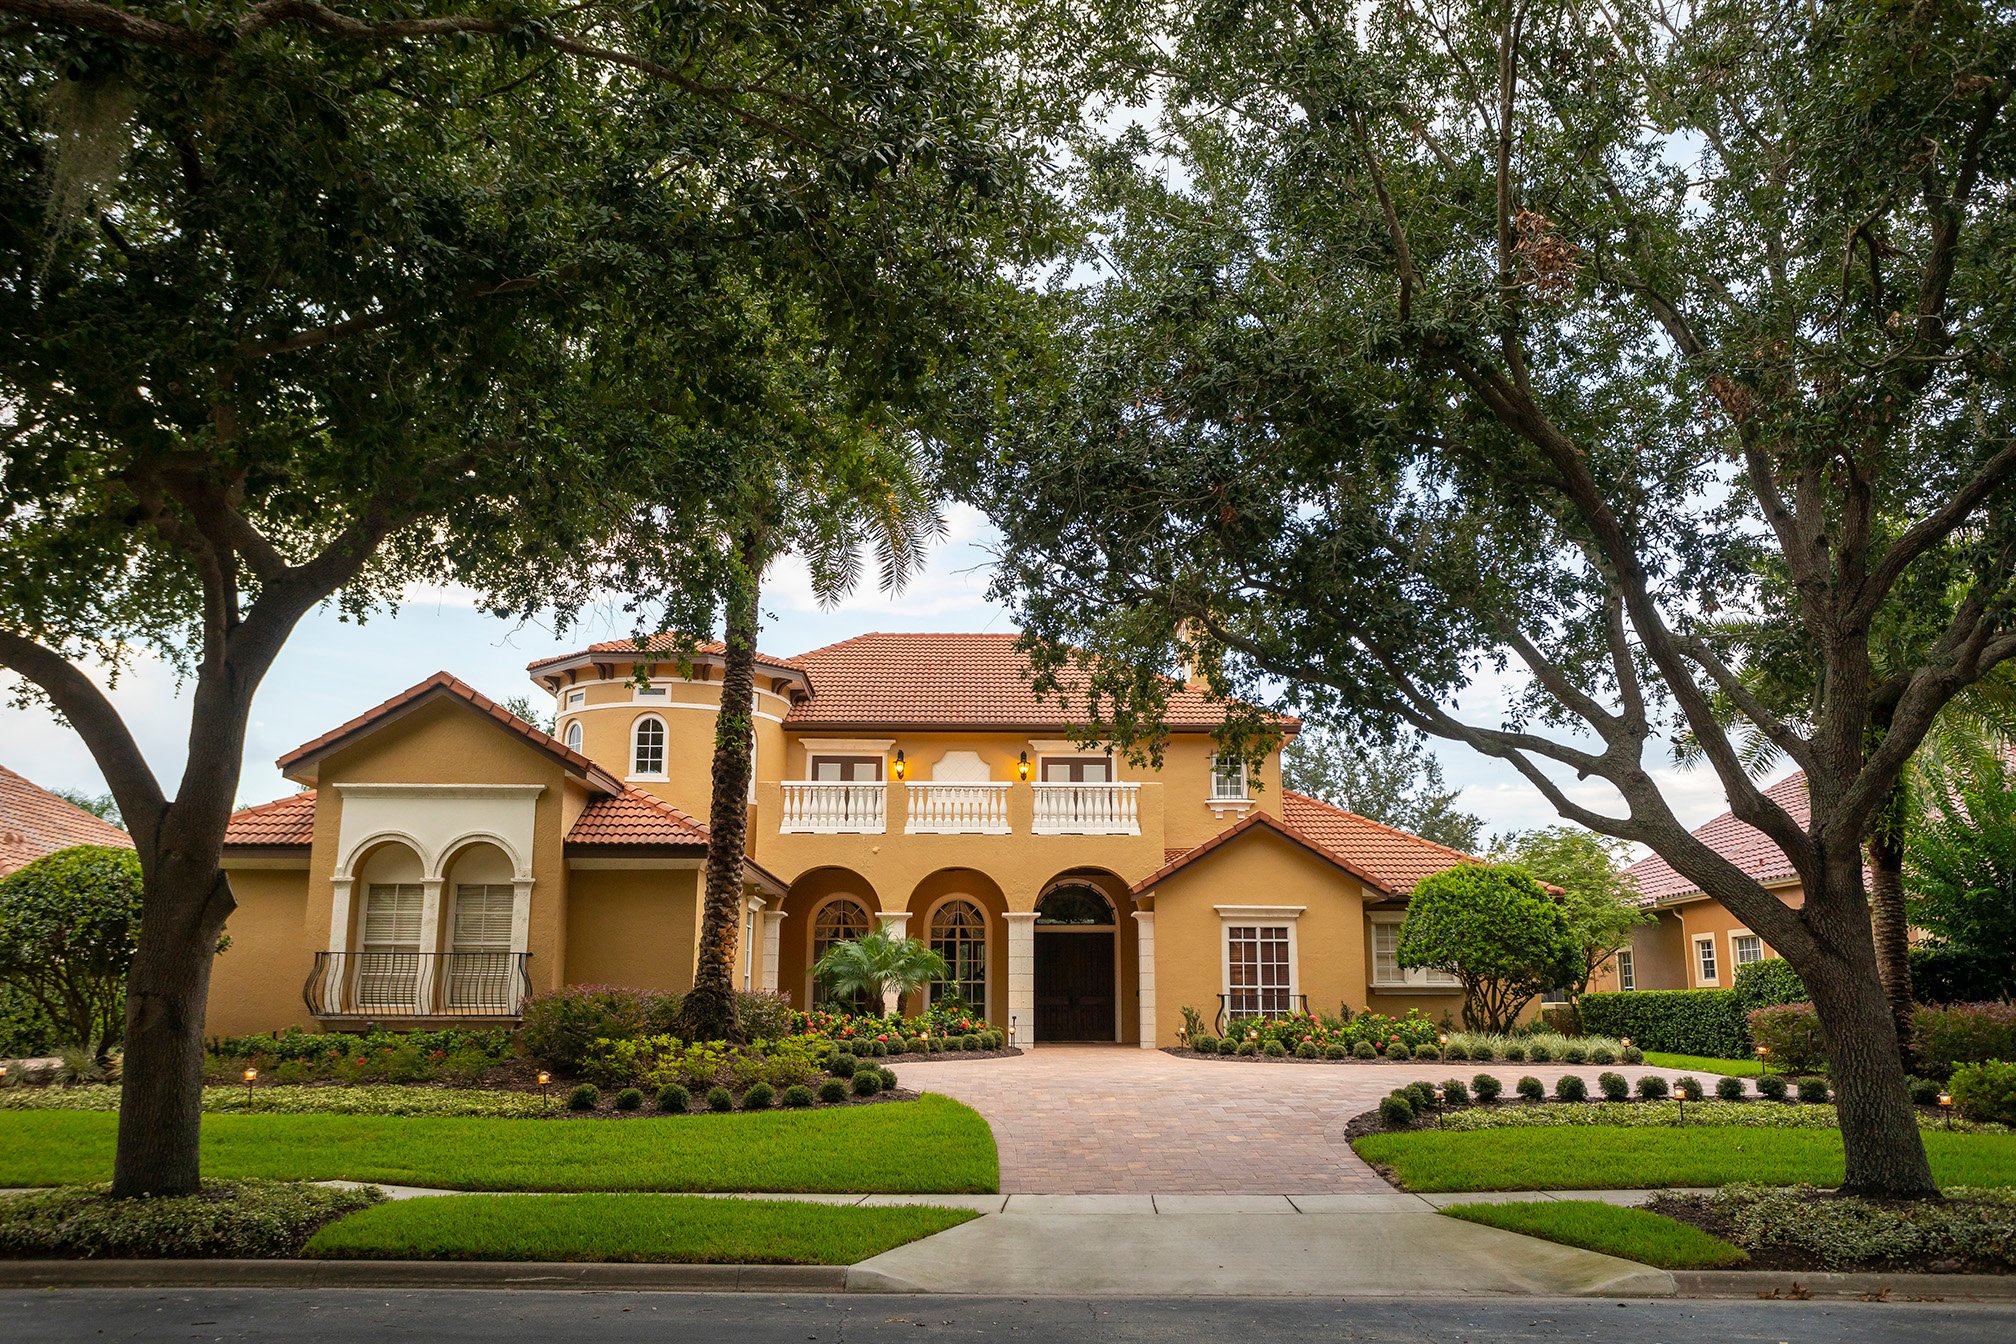 20 Great Ideas For The Best Front Yard Landscaping At Your Orlando